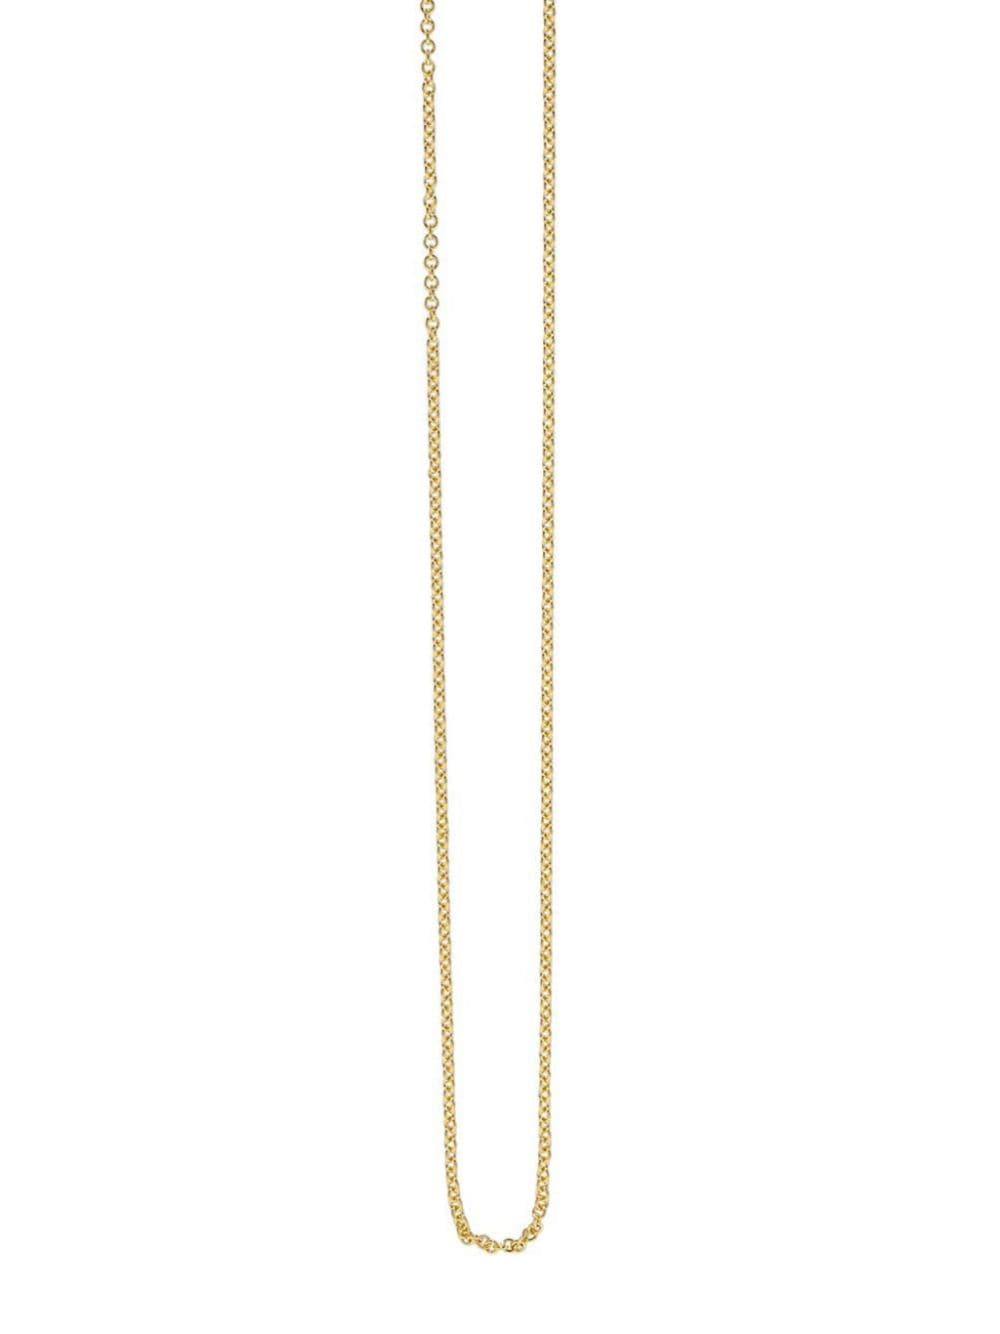 Azlee 18kt yellow gold Thin Cable chain necklace von Azlee